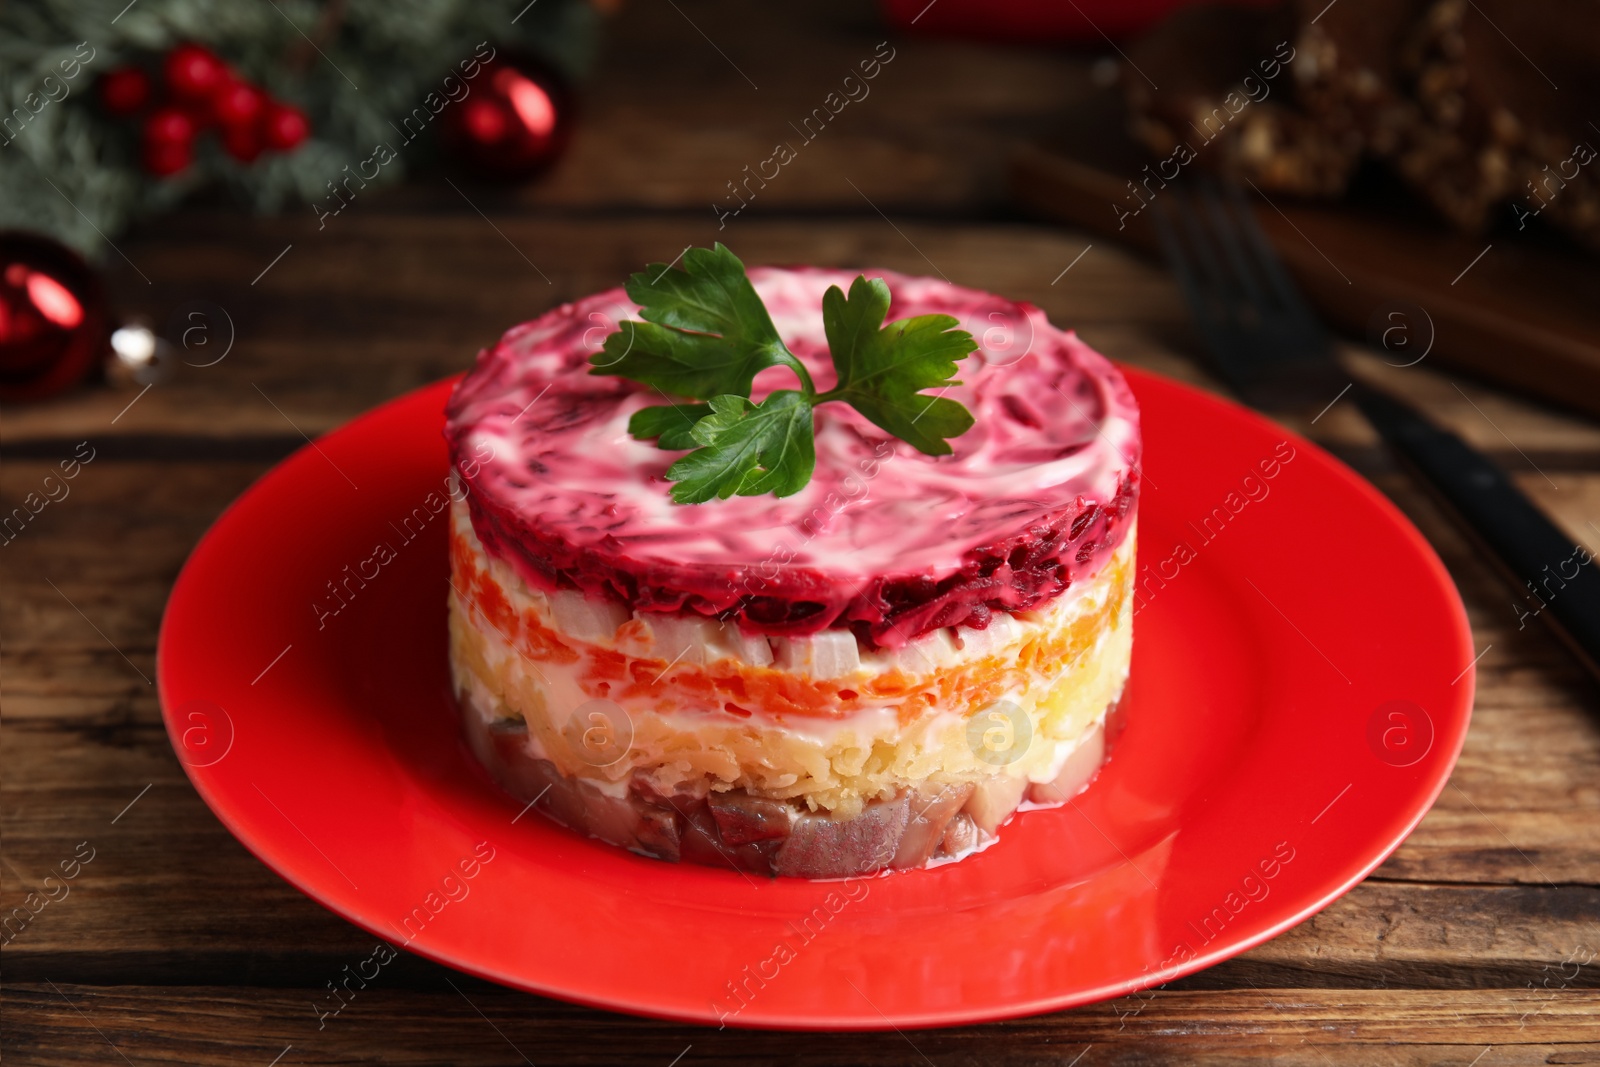 Photo of Herring under fur coat served on wooden table, closeup. Traditional russian salad